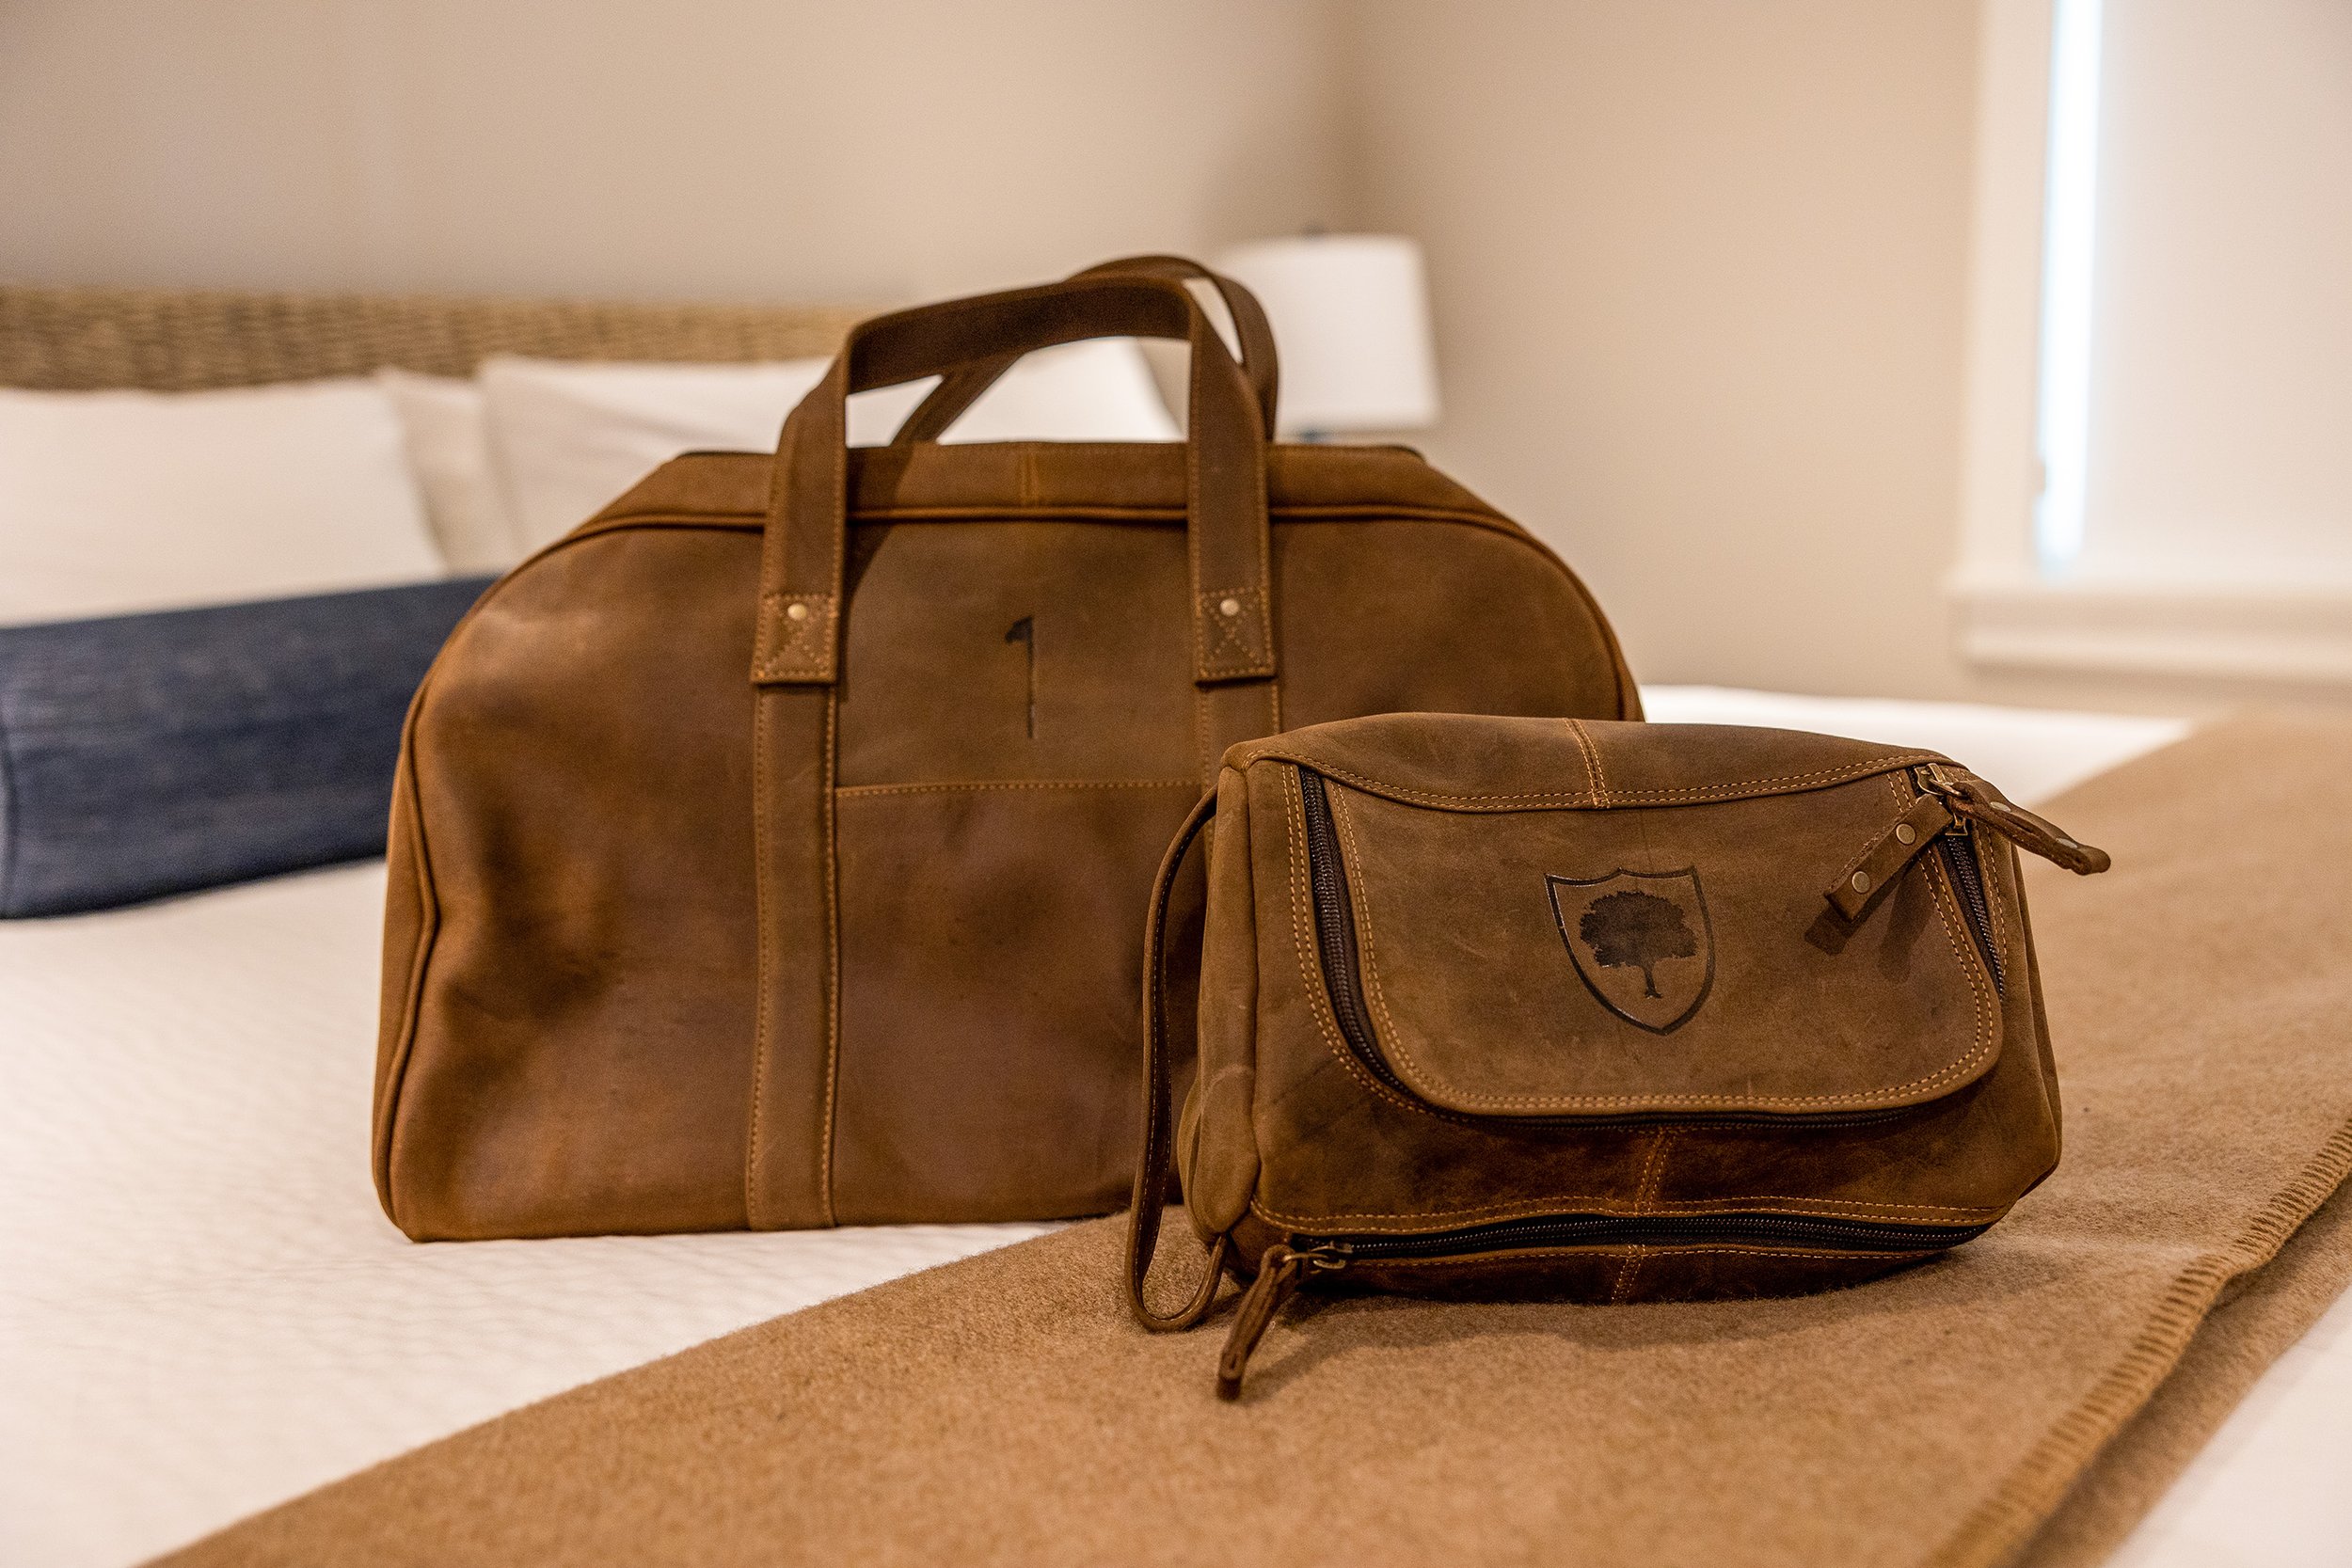 Leather bags on bed